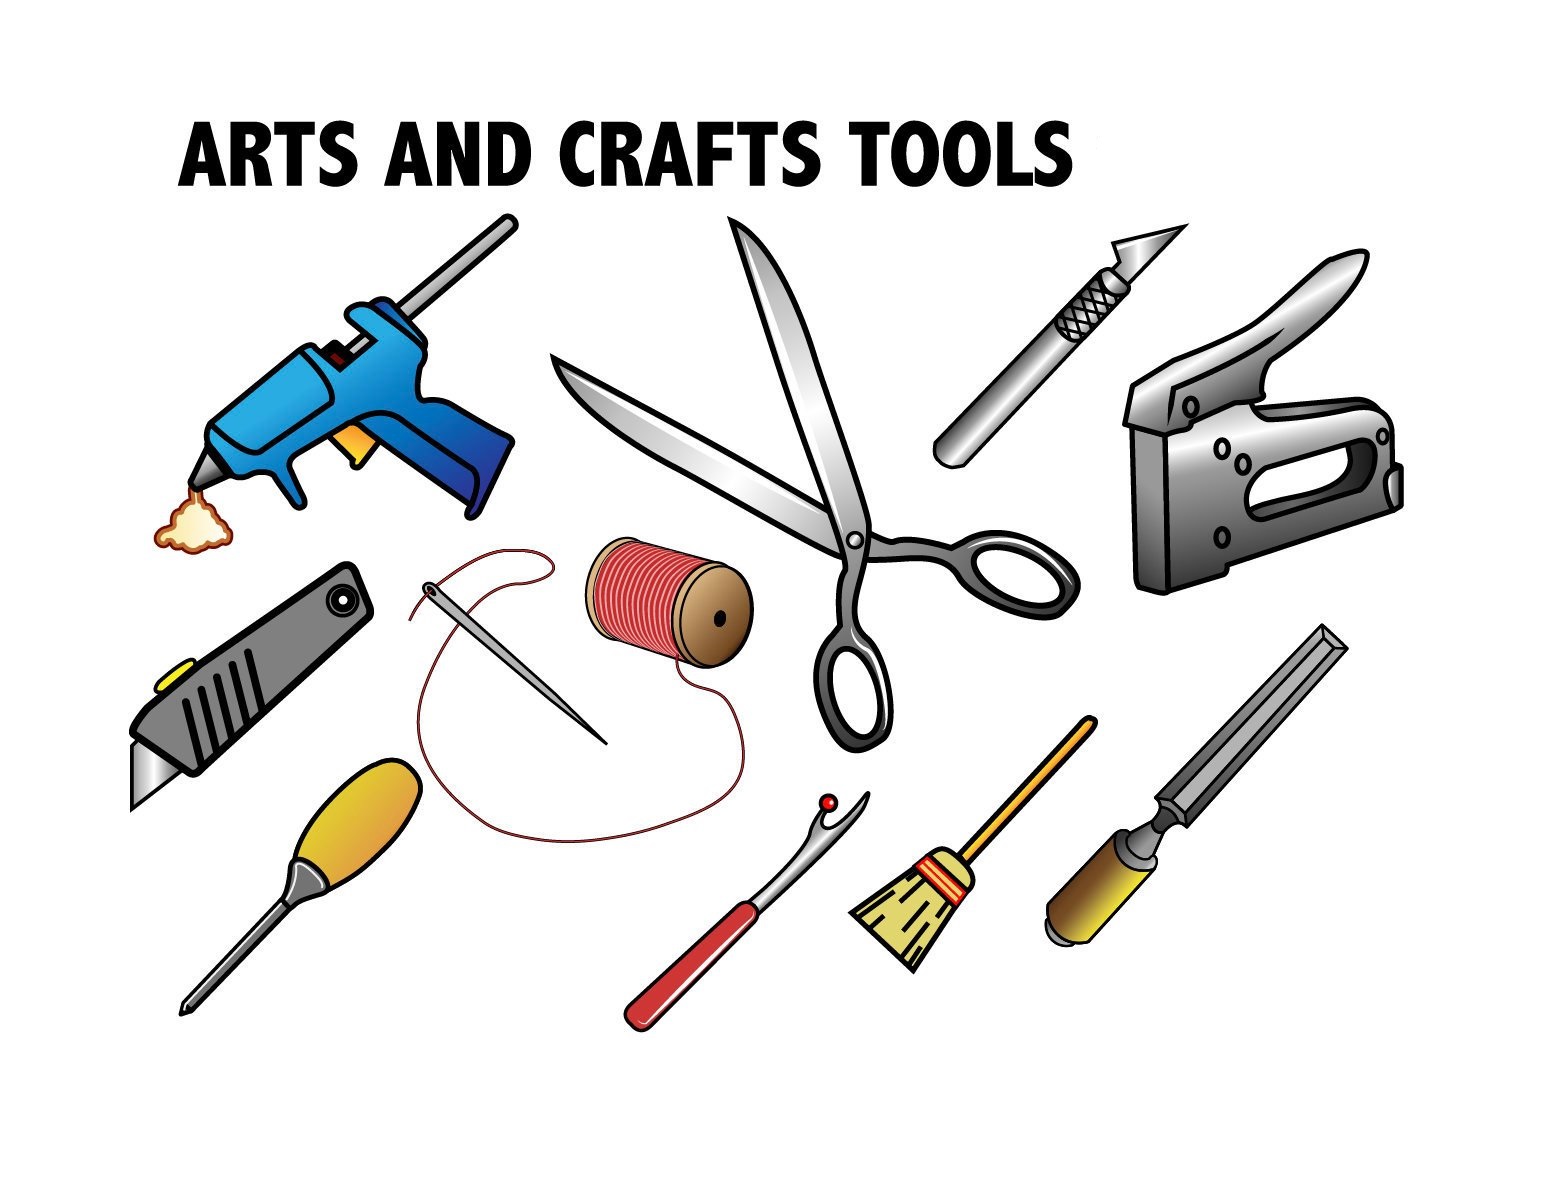 Arts and Crafts Tools Market Report | Size, Share, Growth and Forecast